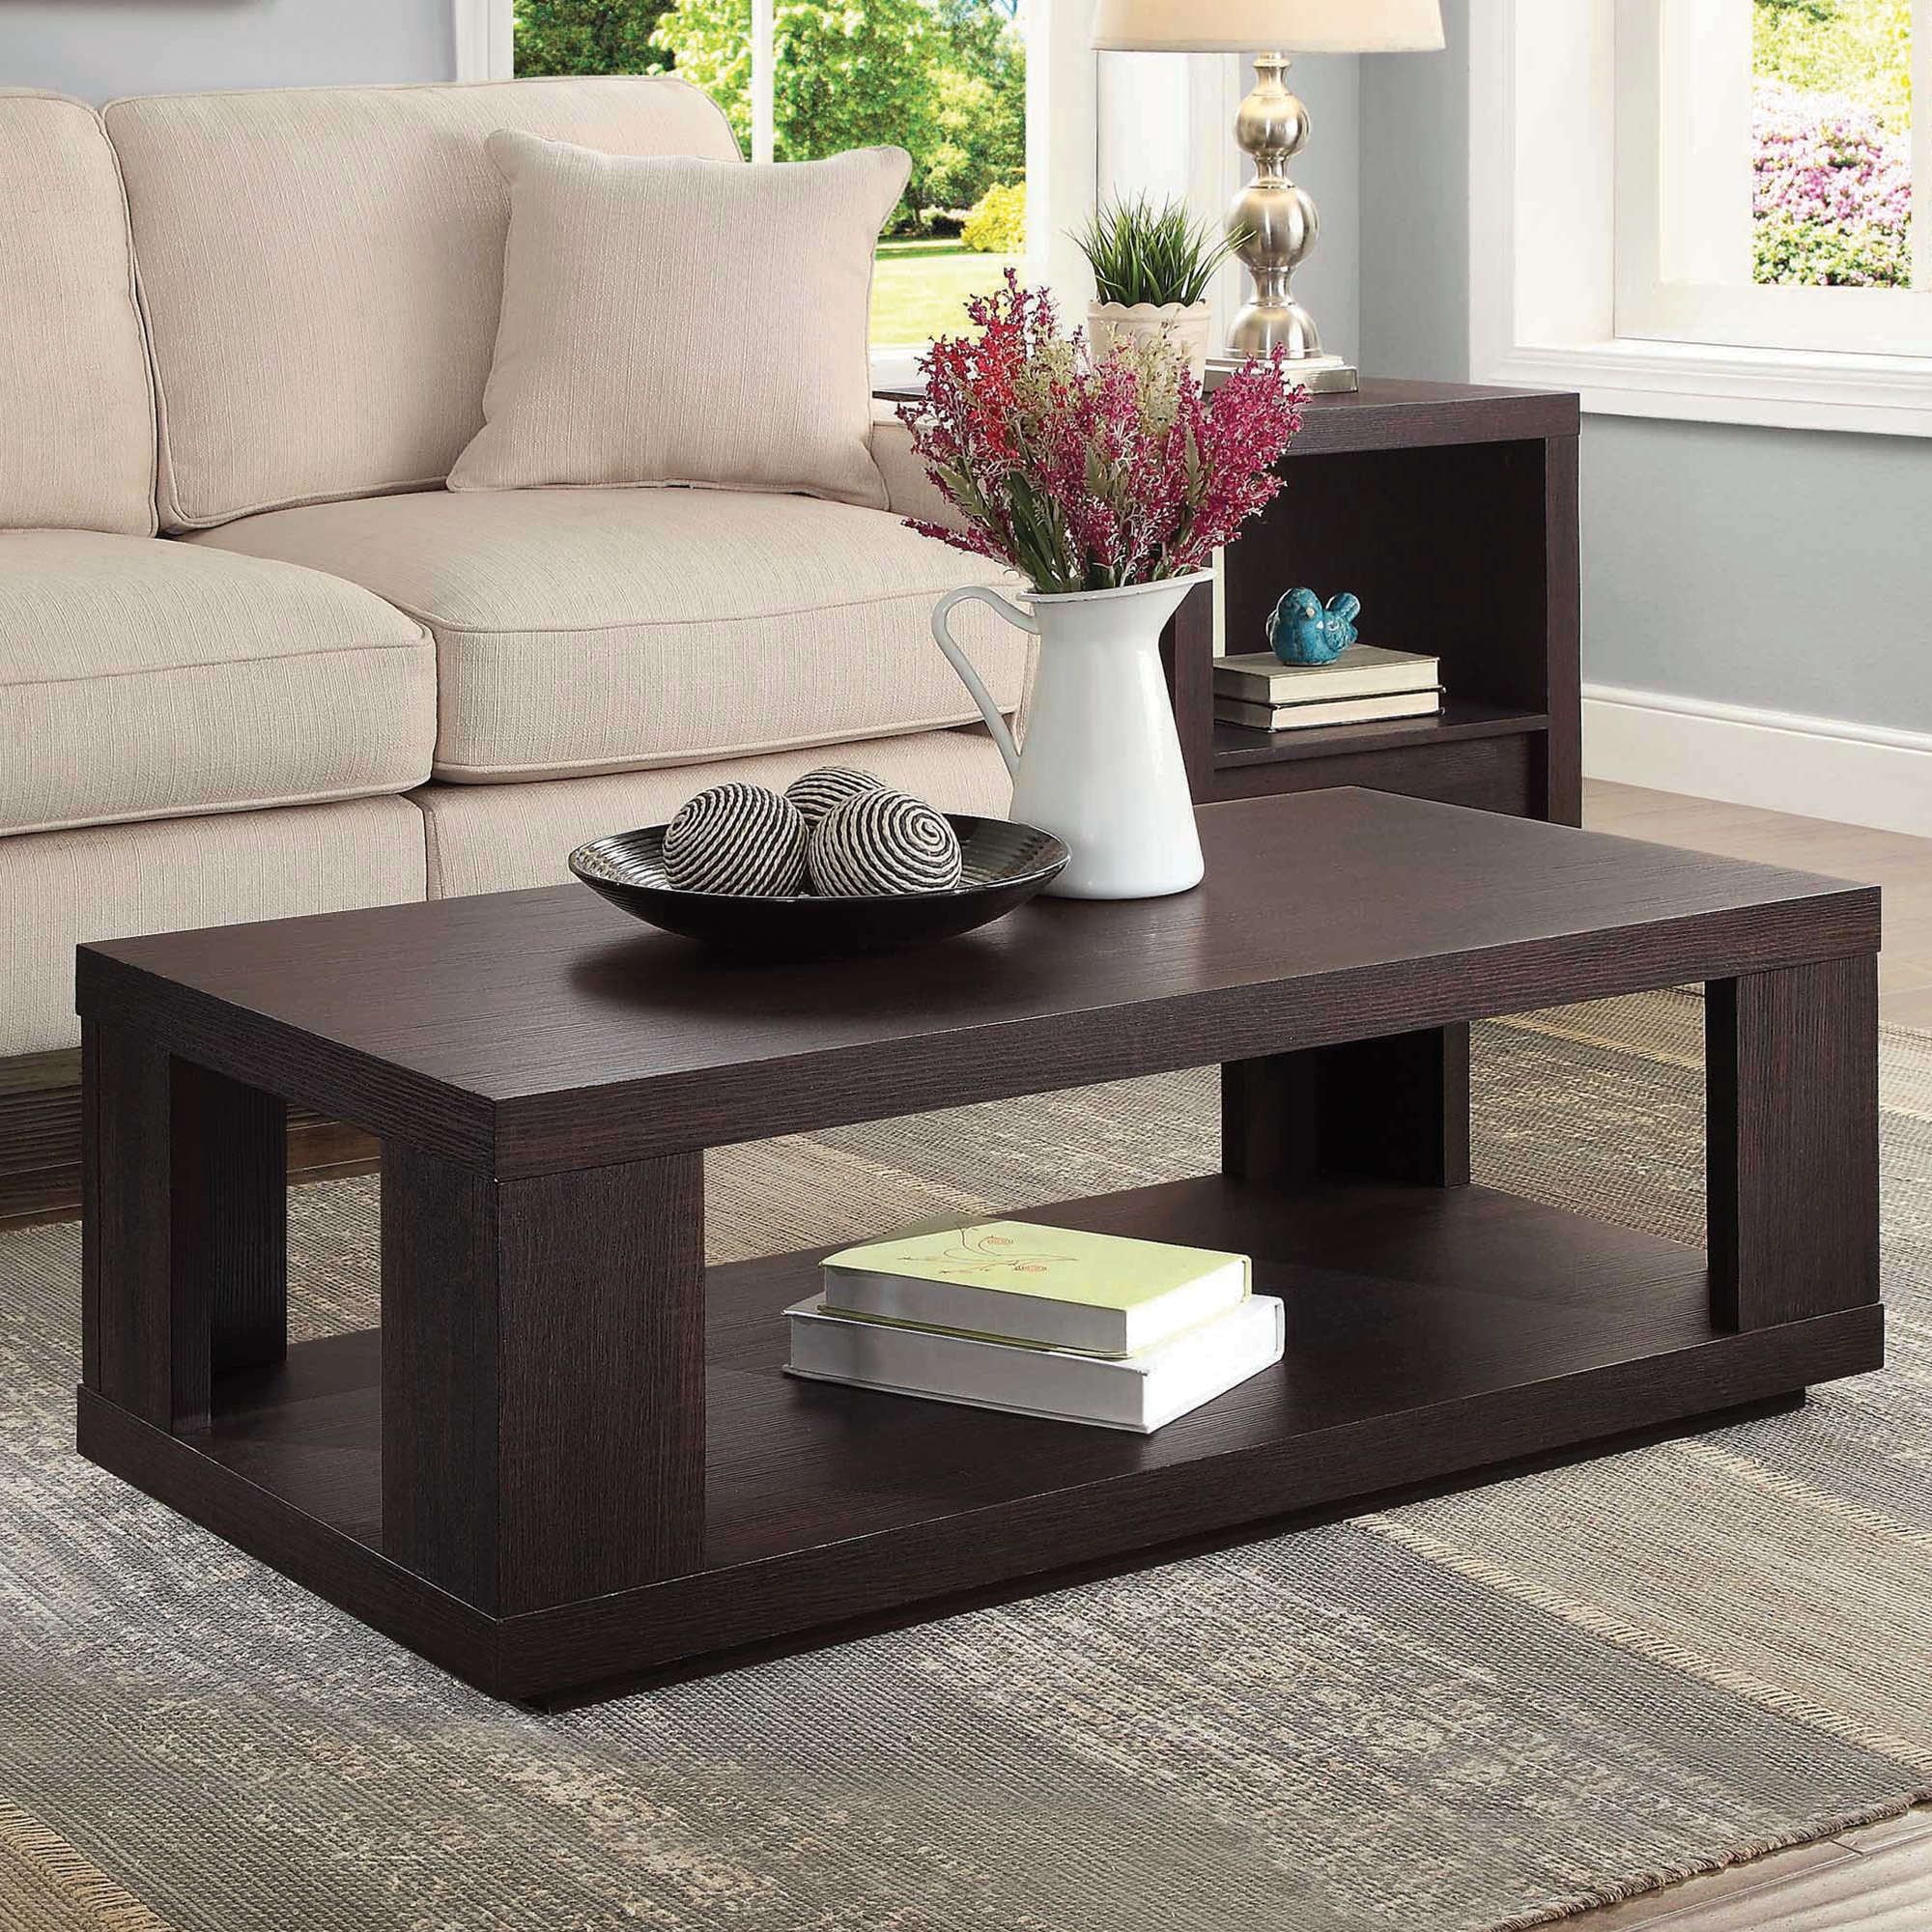 Better Homes & Gardens Steele Coffee Table With Lower Shelf, Espresso With Espresso Wood Finish Coffee Tables (Gallery 19 of 21)